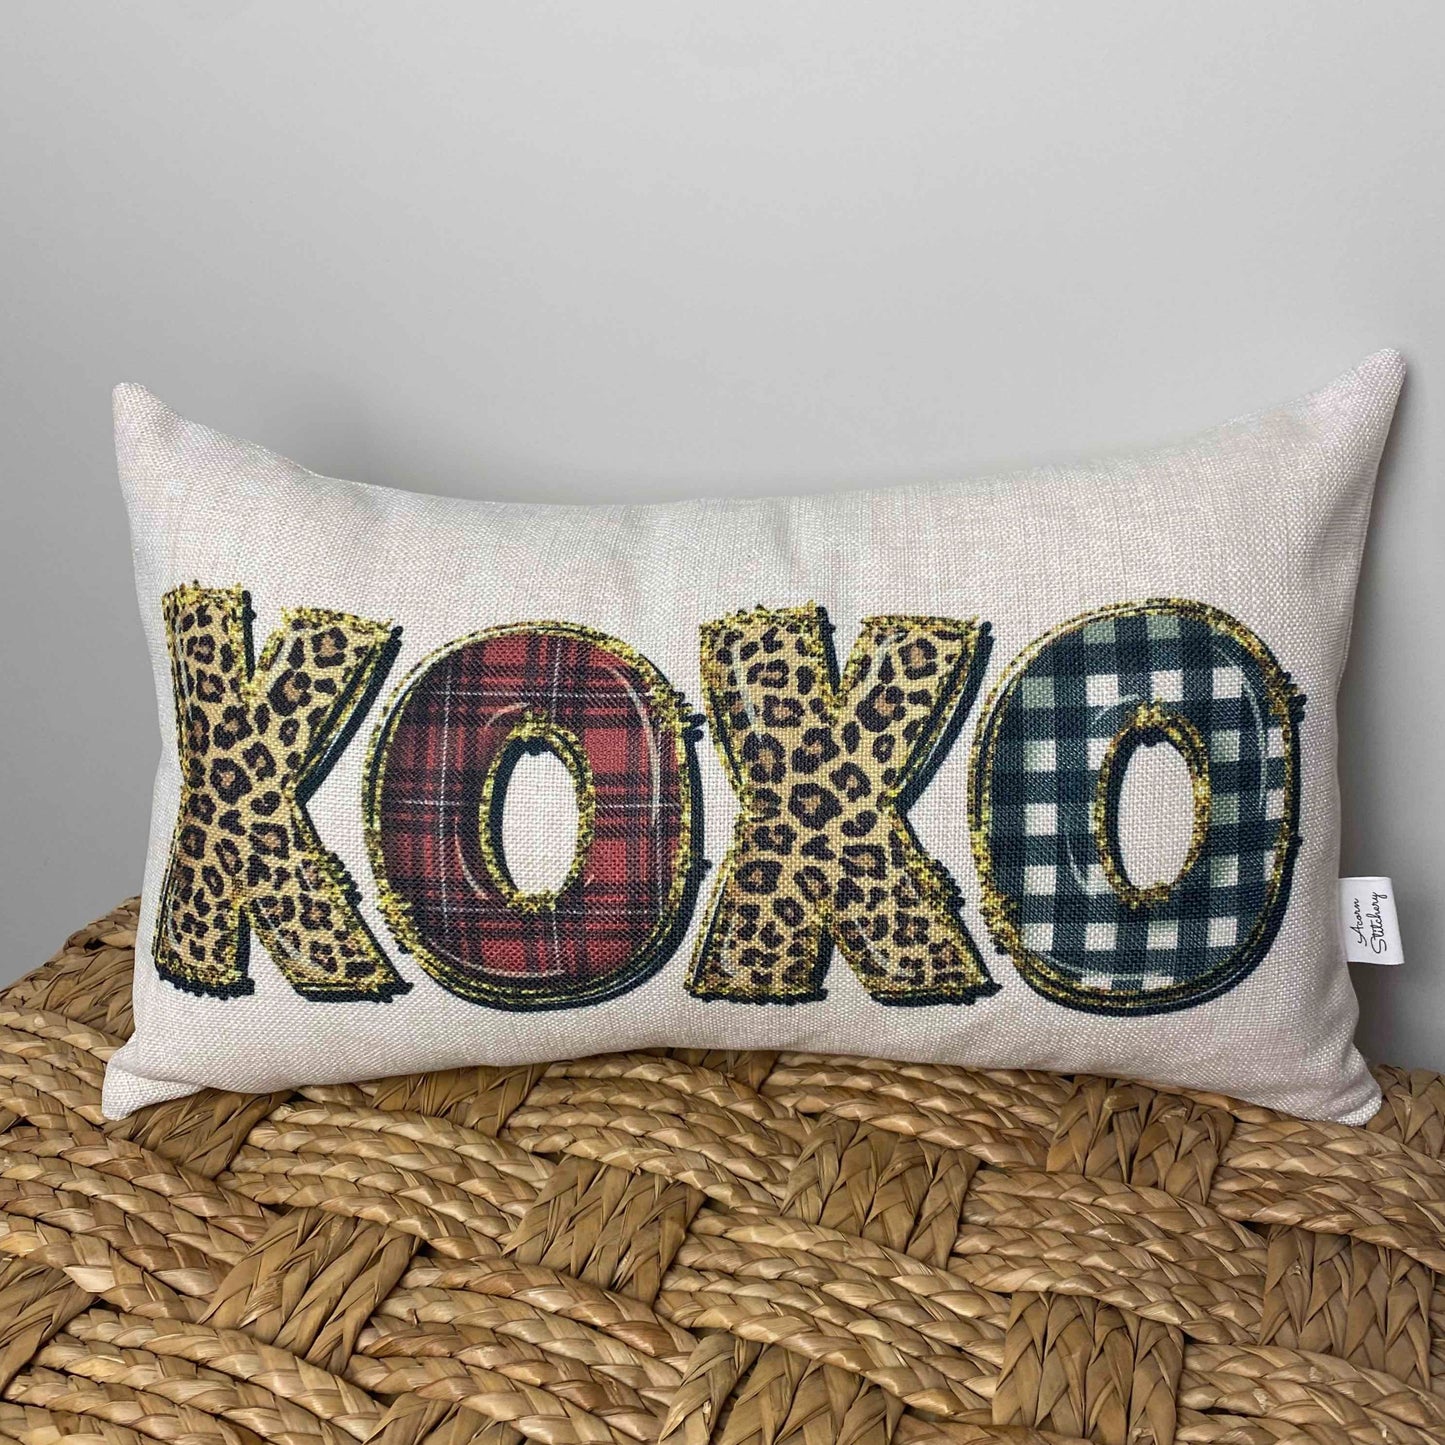 hugs and kisses pillow with leopard print letters xoxo